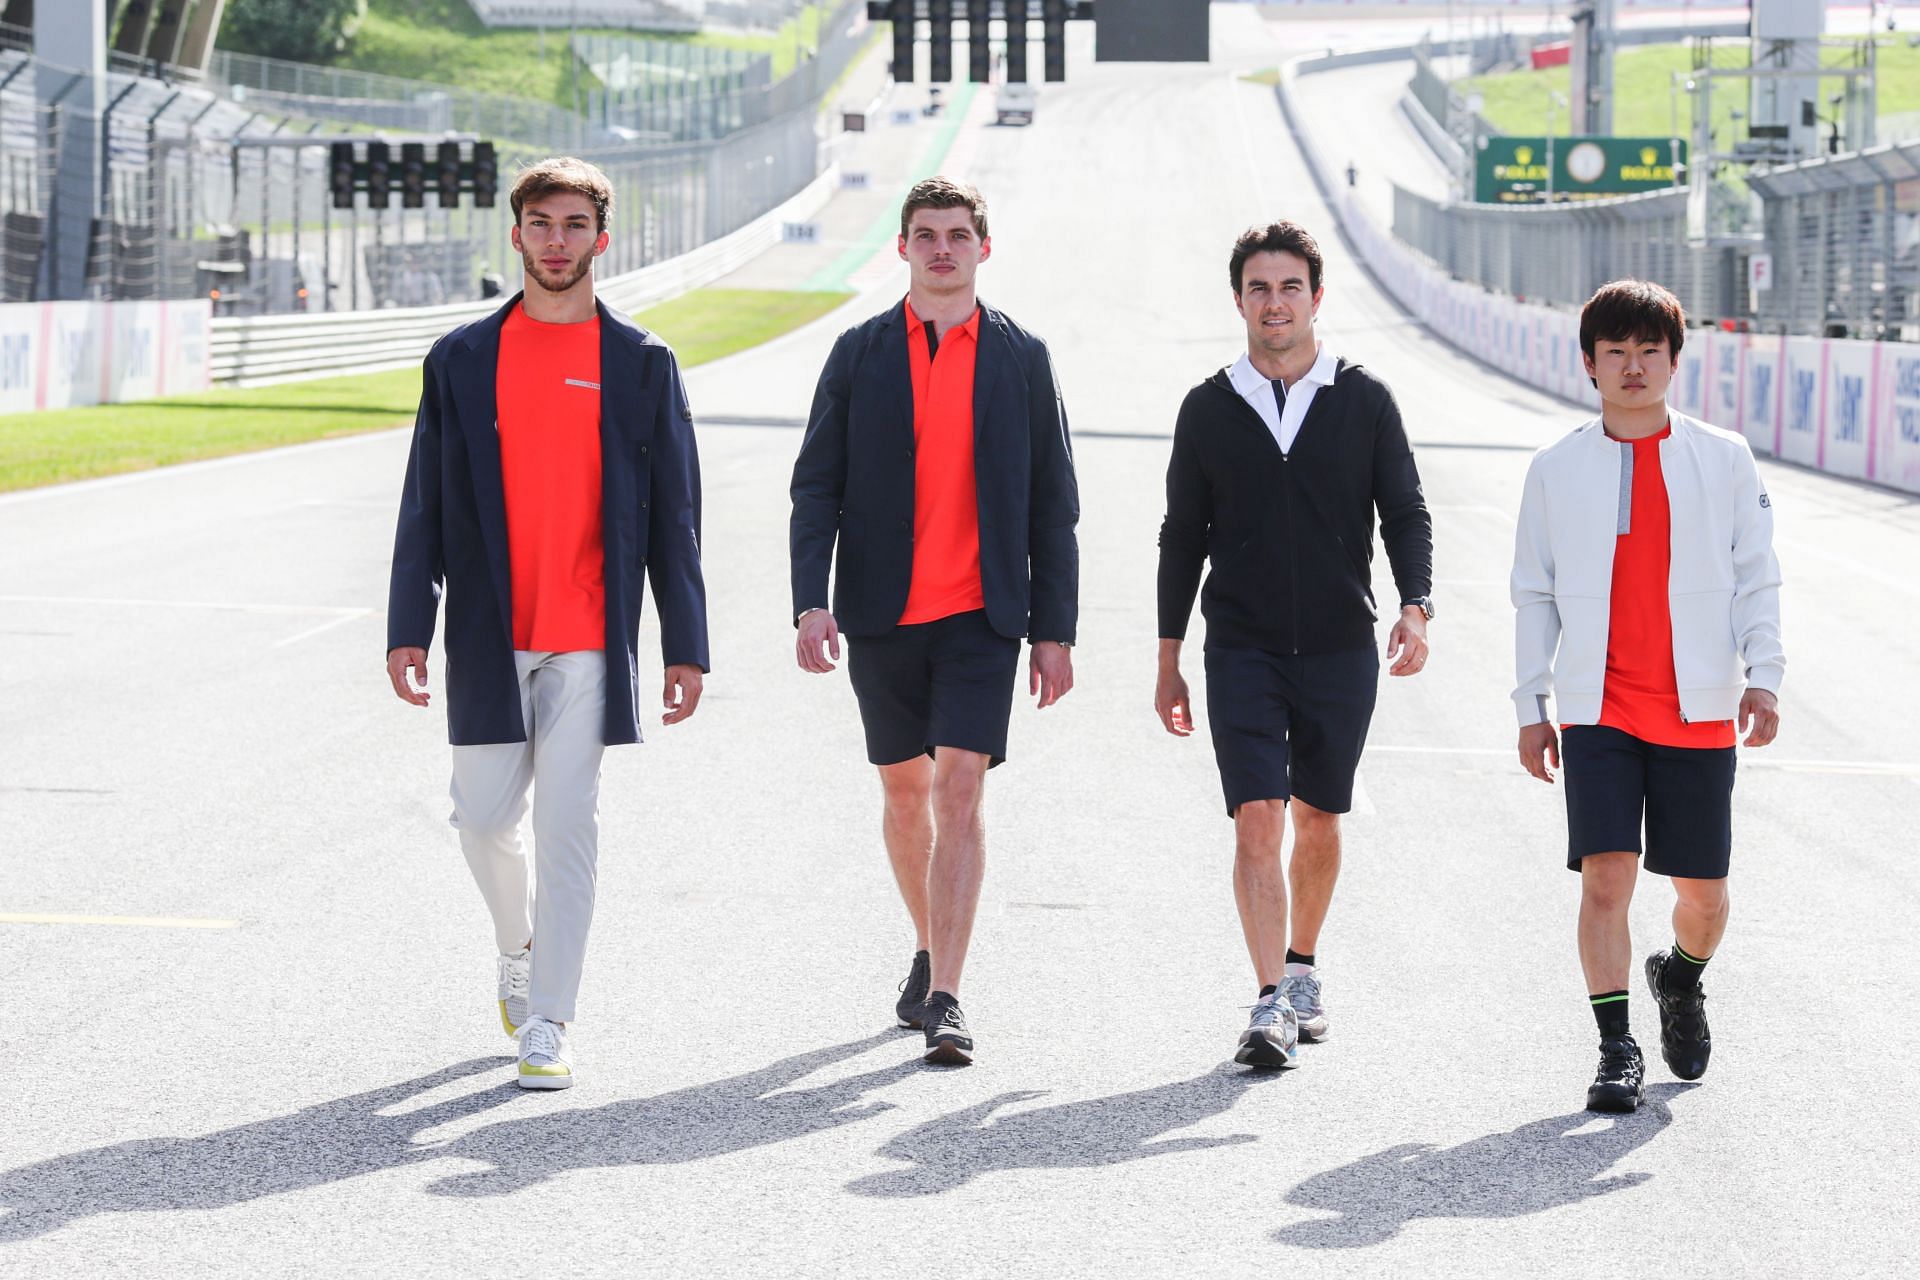 Pierre Gasly (left), Max Verstappen (second from left) Sergio Perez (second from right),Yuki Tsunoda (right) at the Red Bull Ring, 2021 Styrian Grand Prix